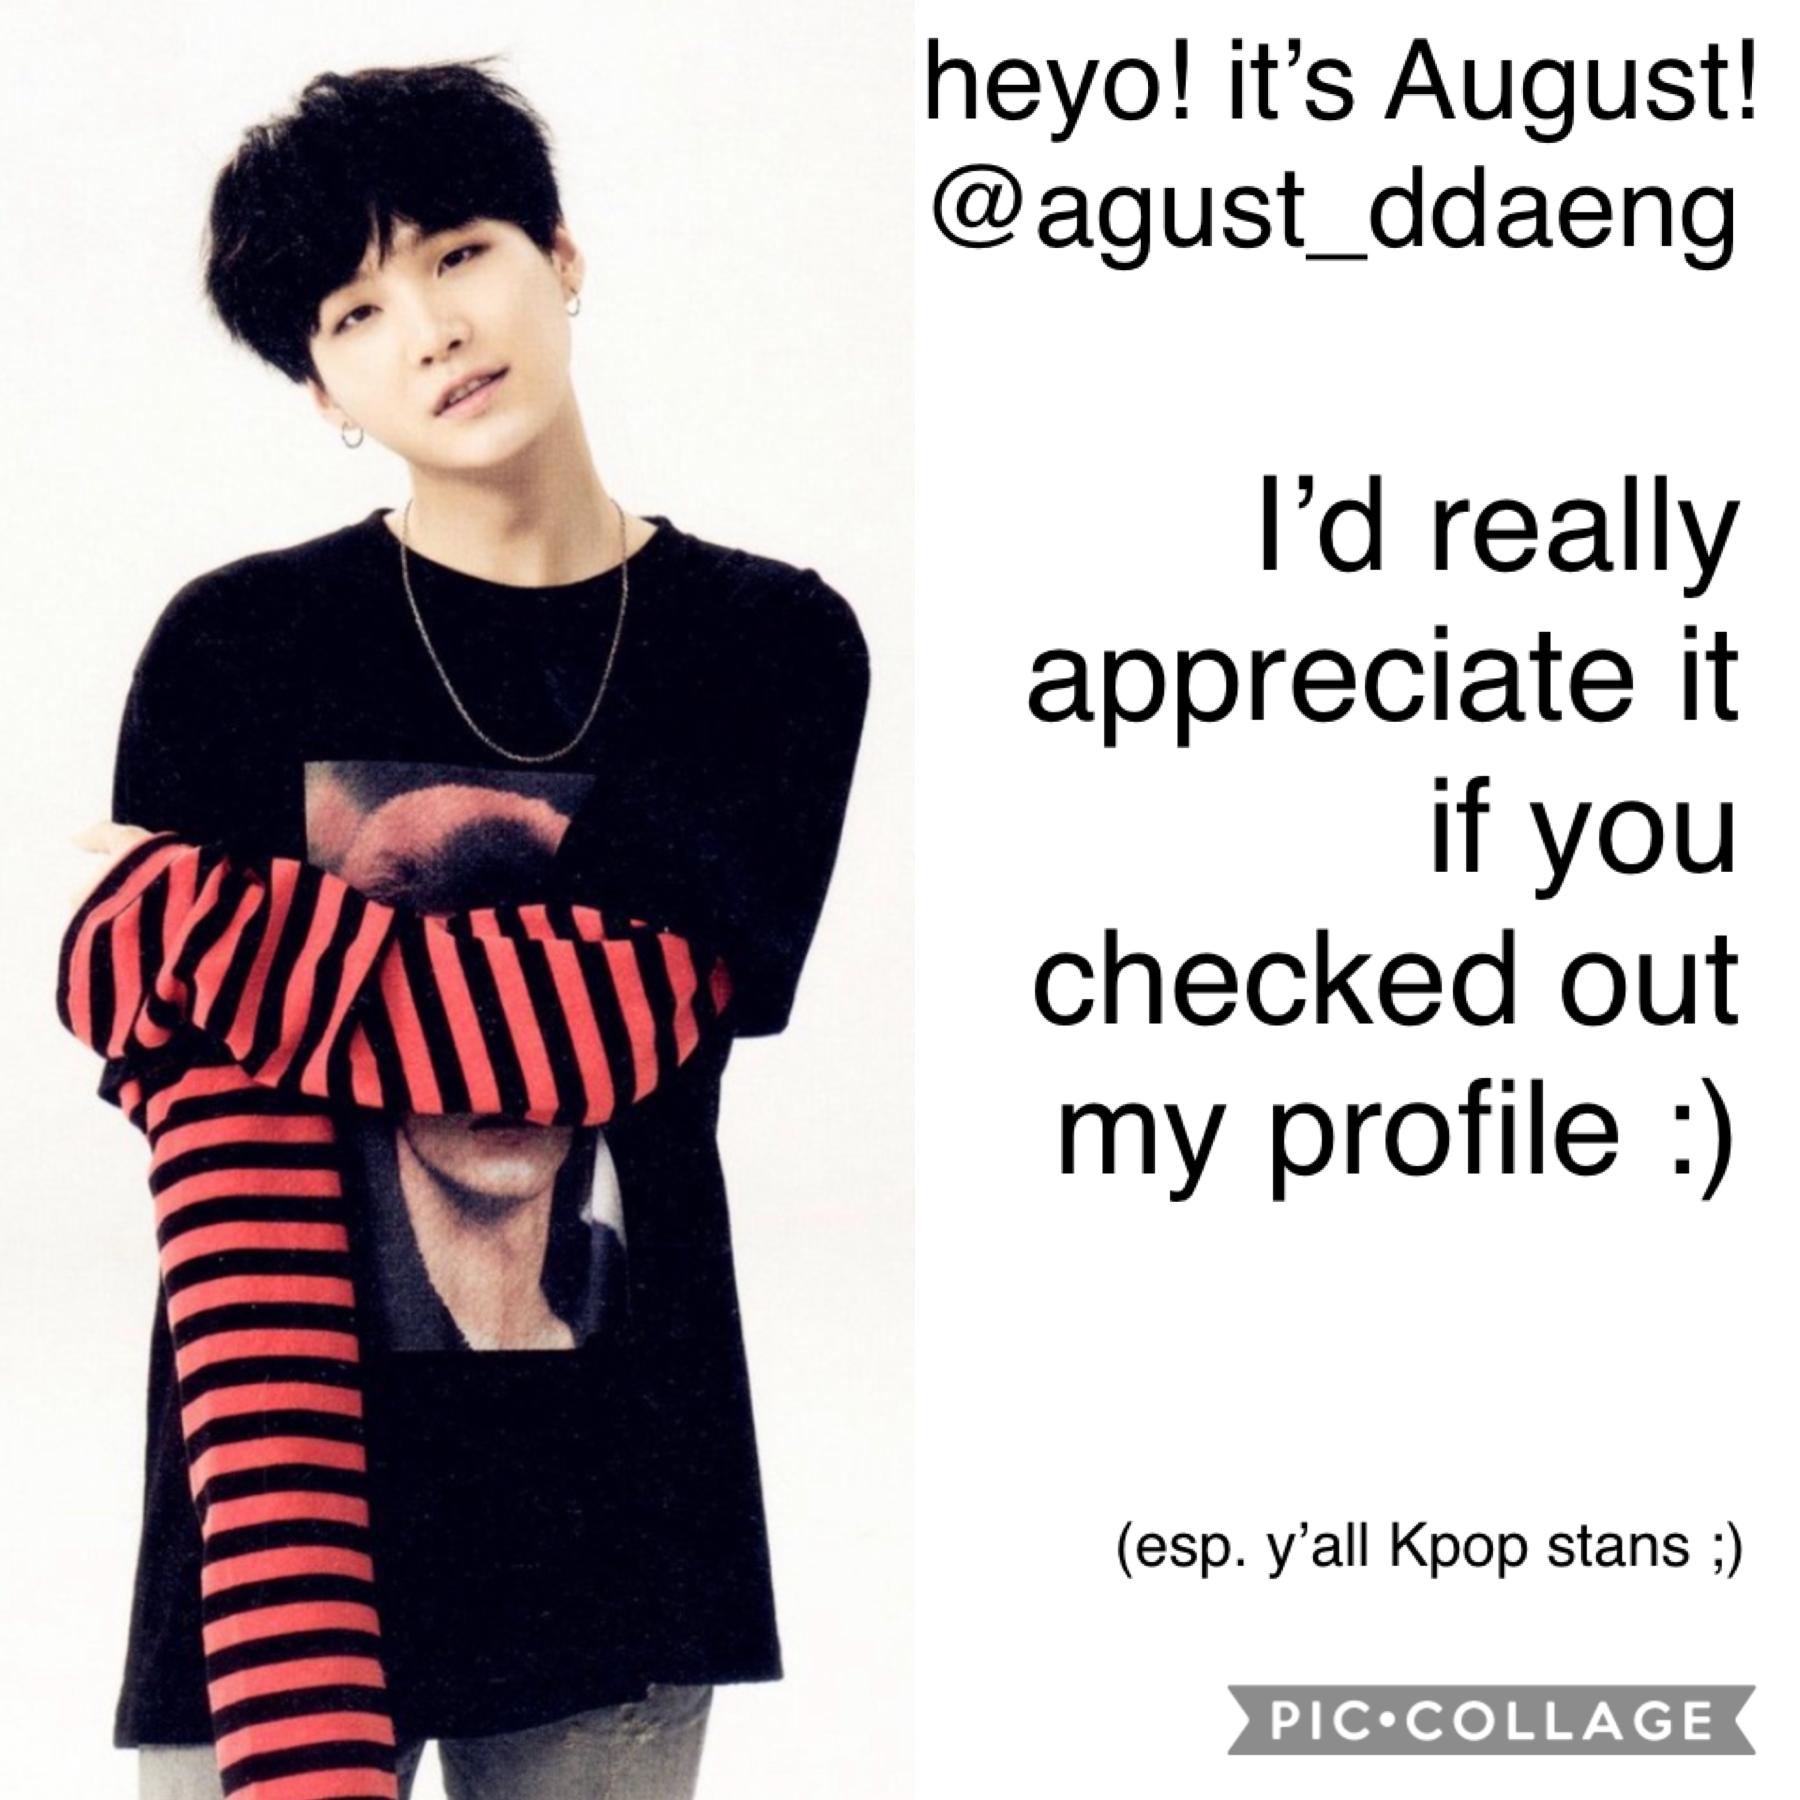 pwease follow me uwu 

my extras is @august-extras if you wanna find me there as well ❤️

